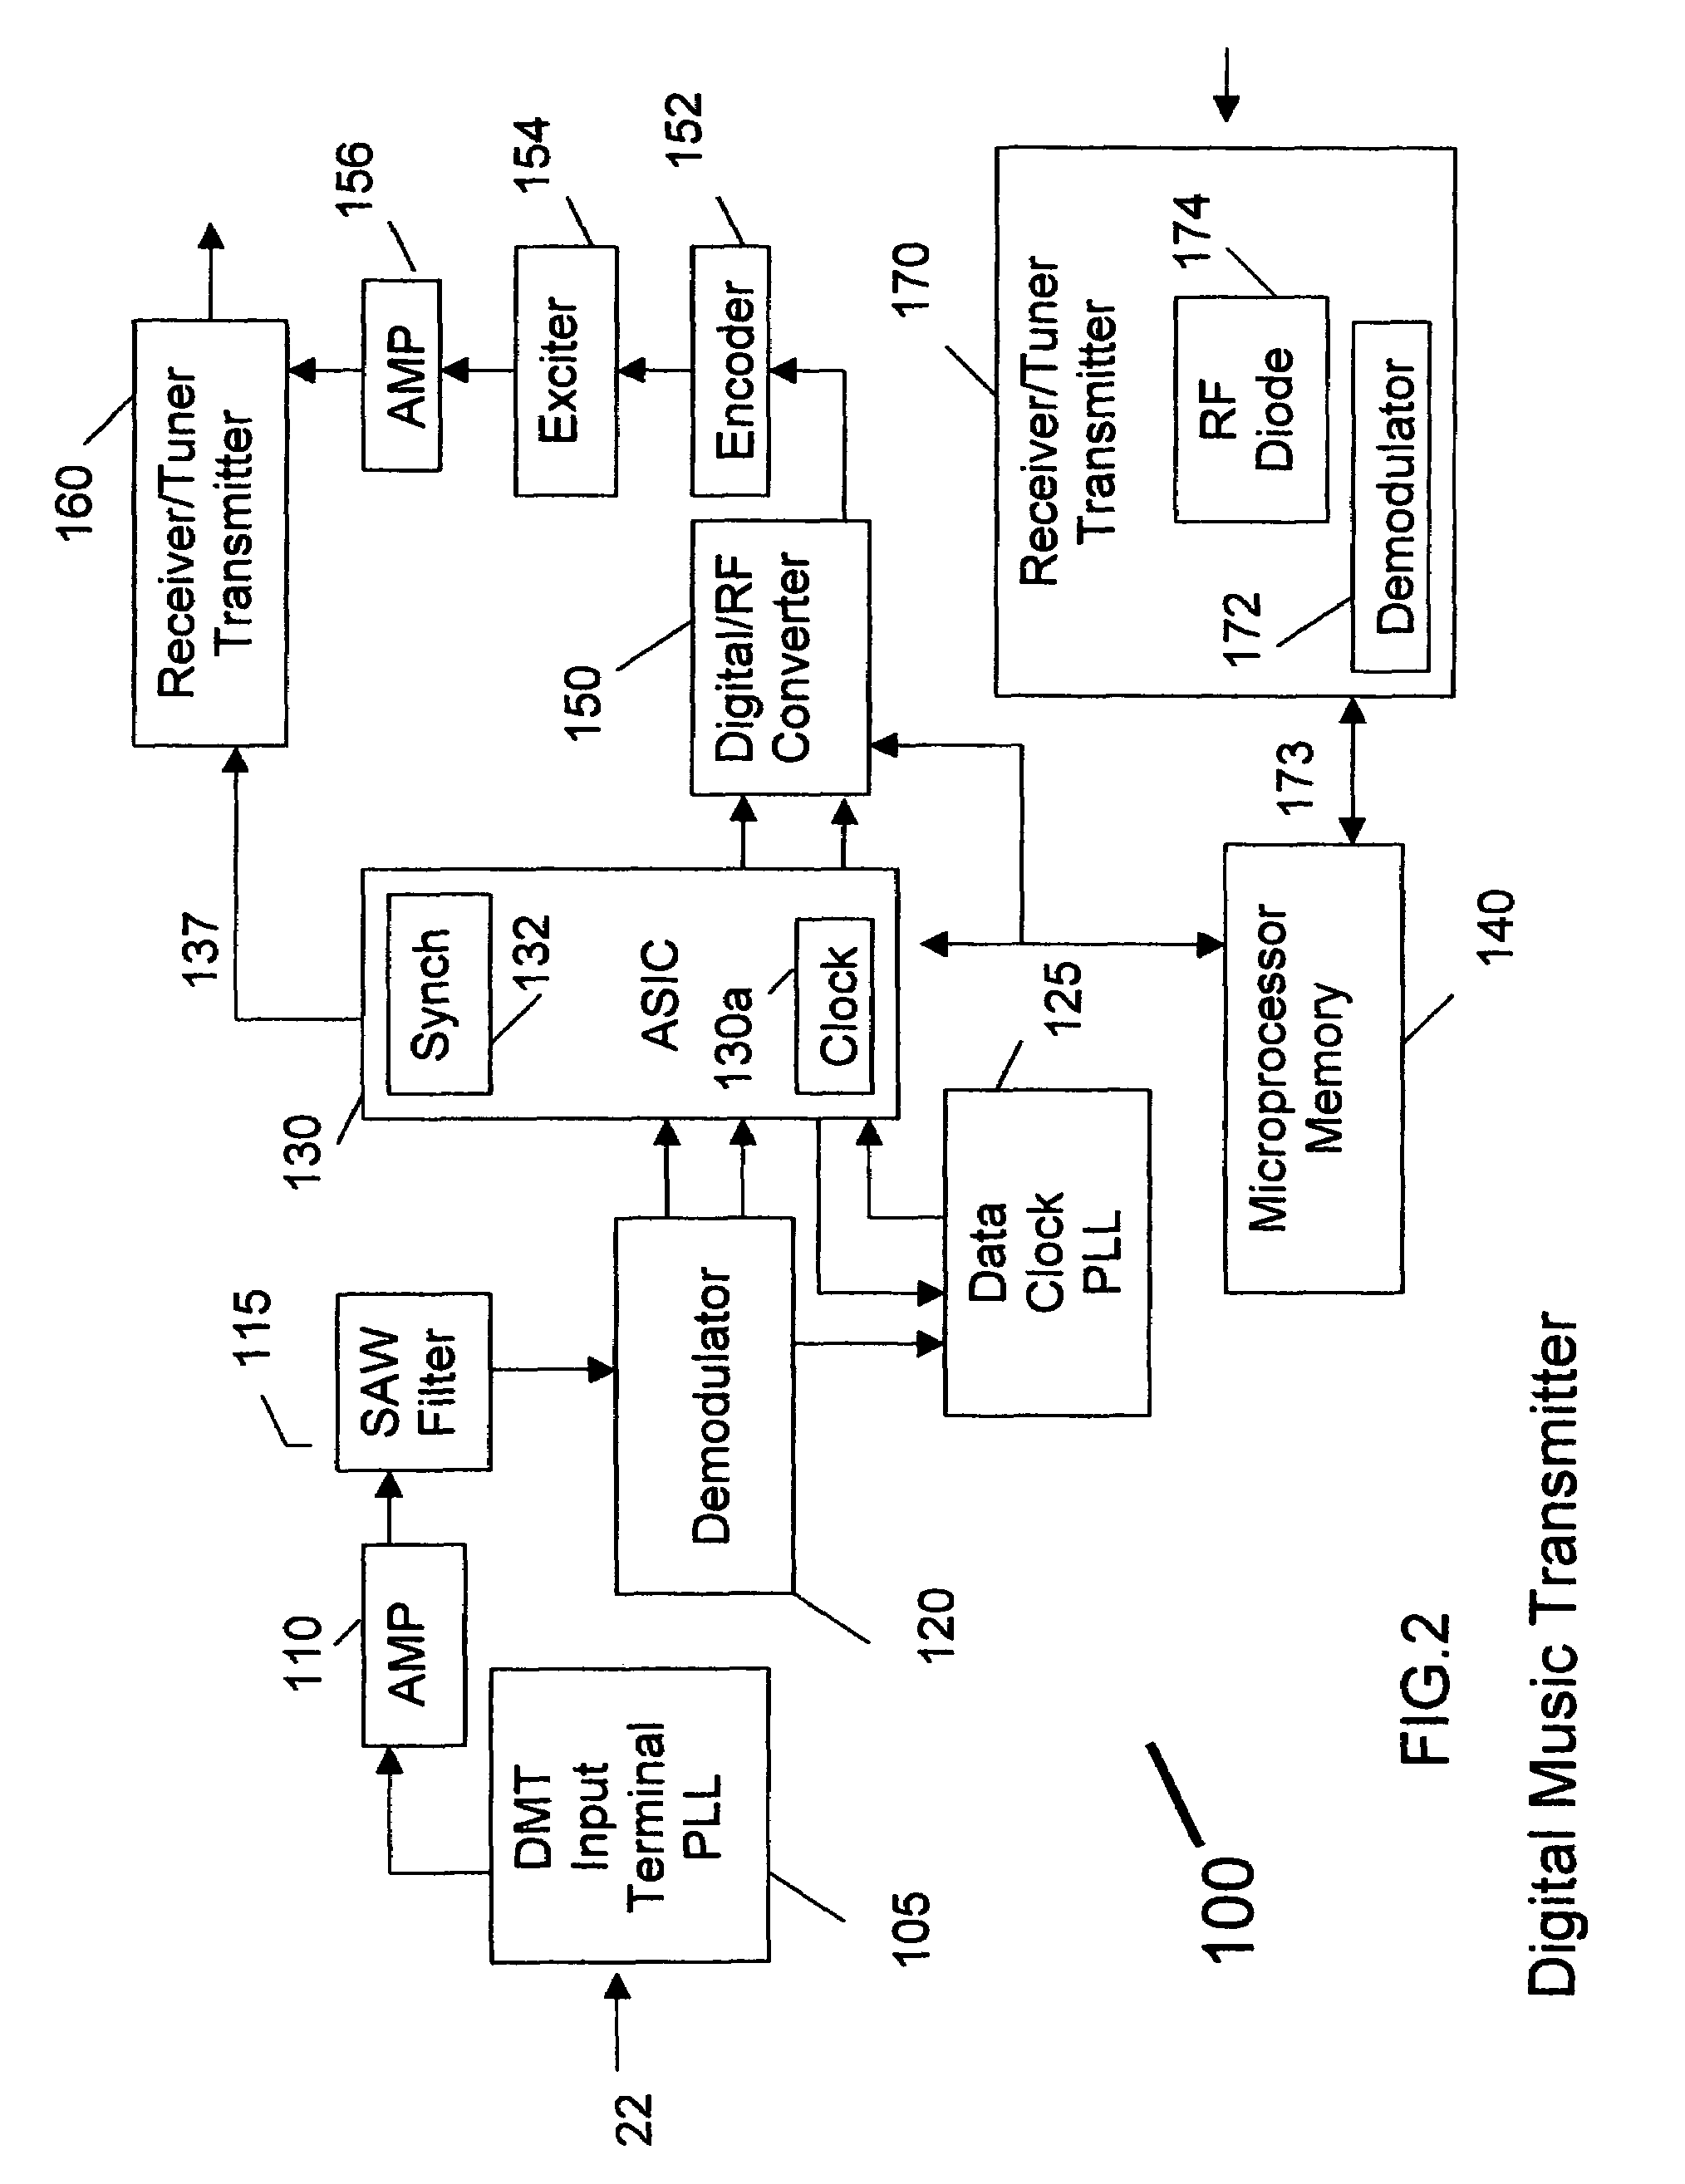 Wireless environment method and apparatus